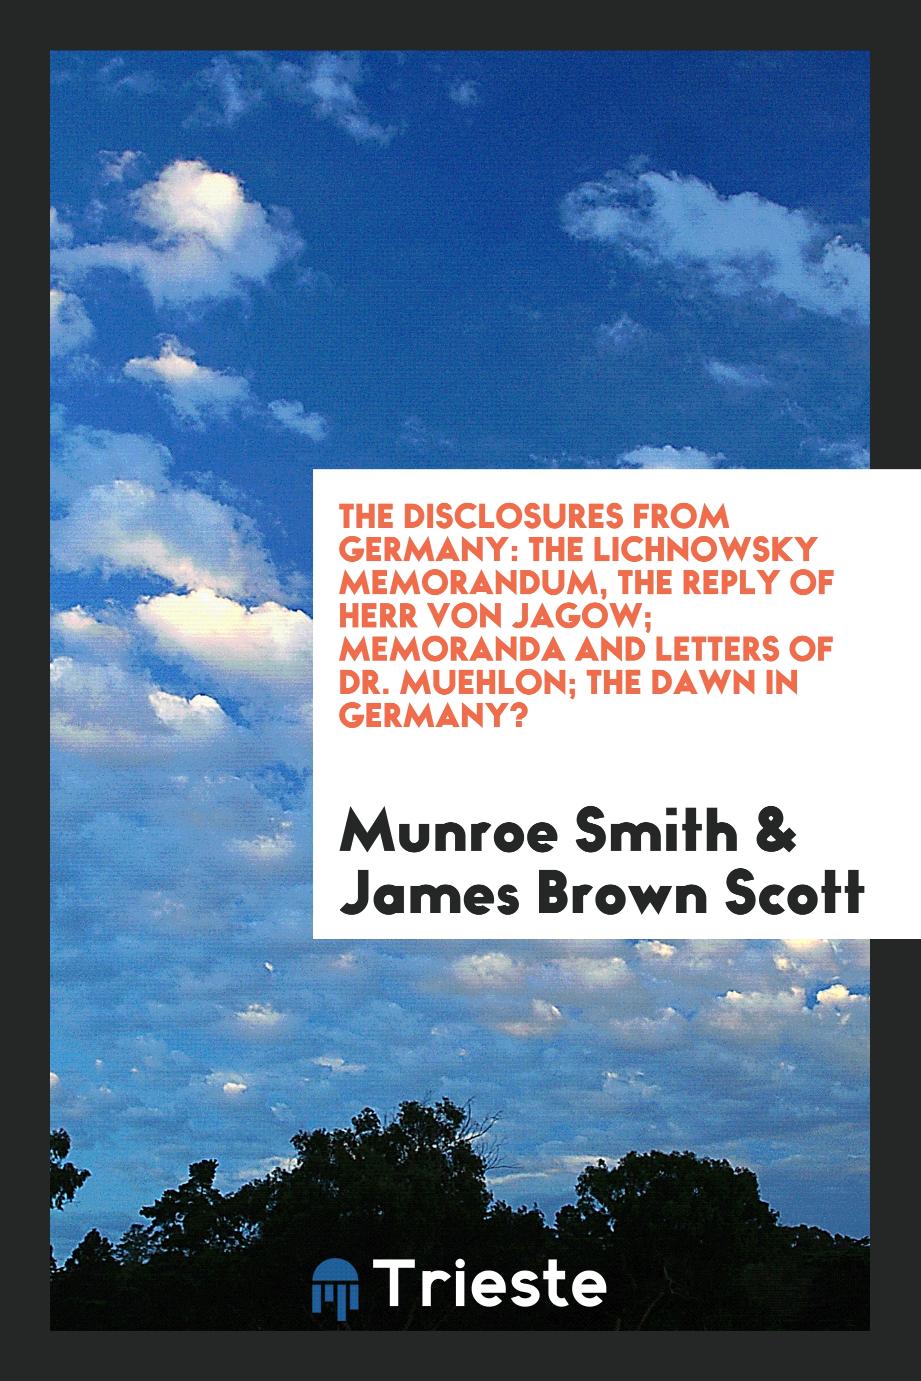 The Disclosures from Germany: The Lichnowsky Memorandum, the Reply of Herr von Jagow; Memoranda and Letters of Dr. Muehlon; The Dawn in Germany?